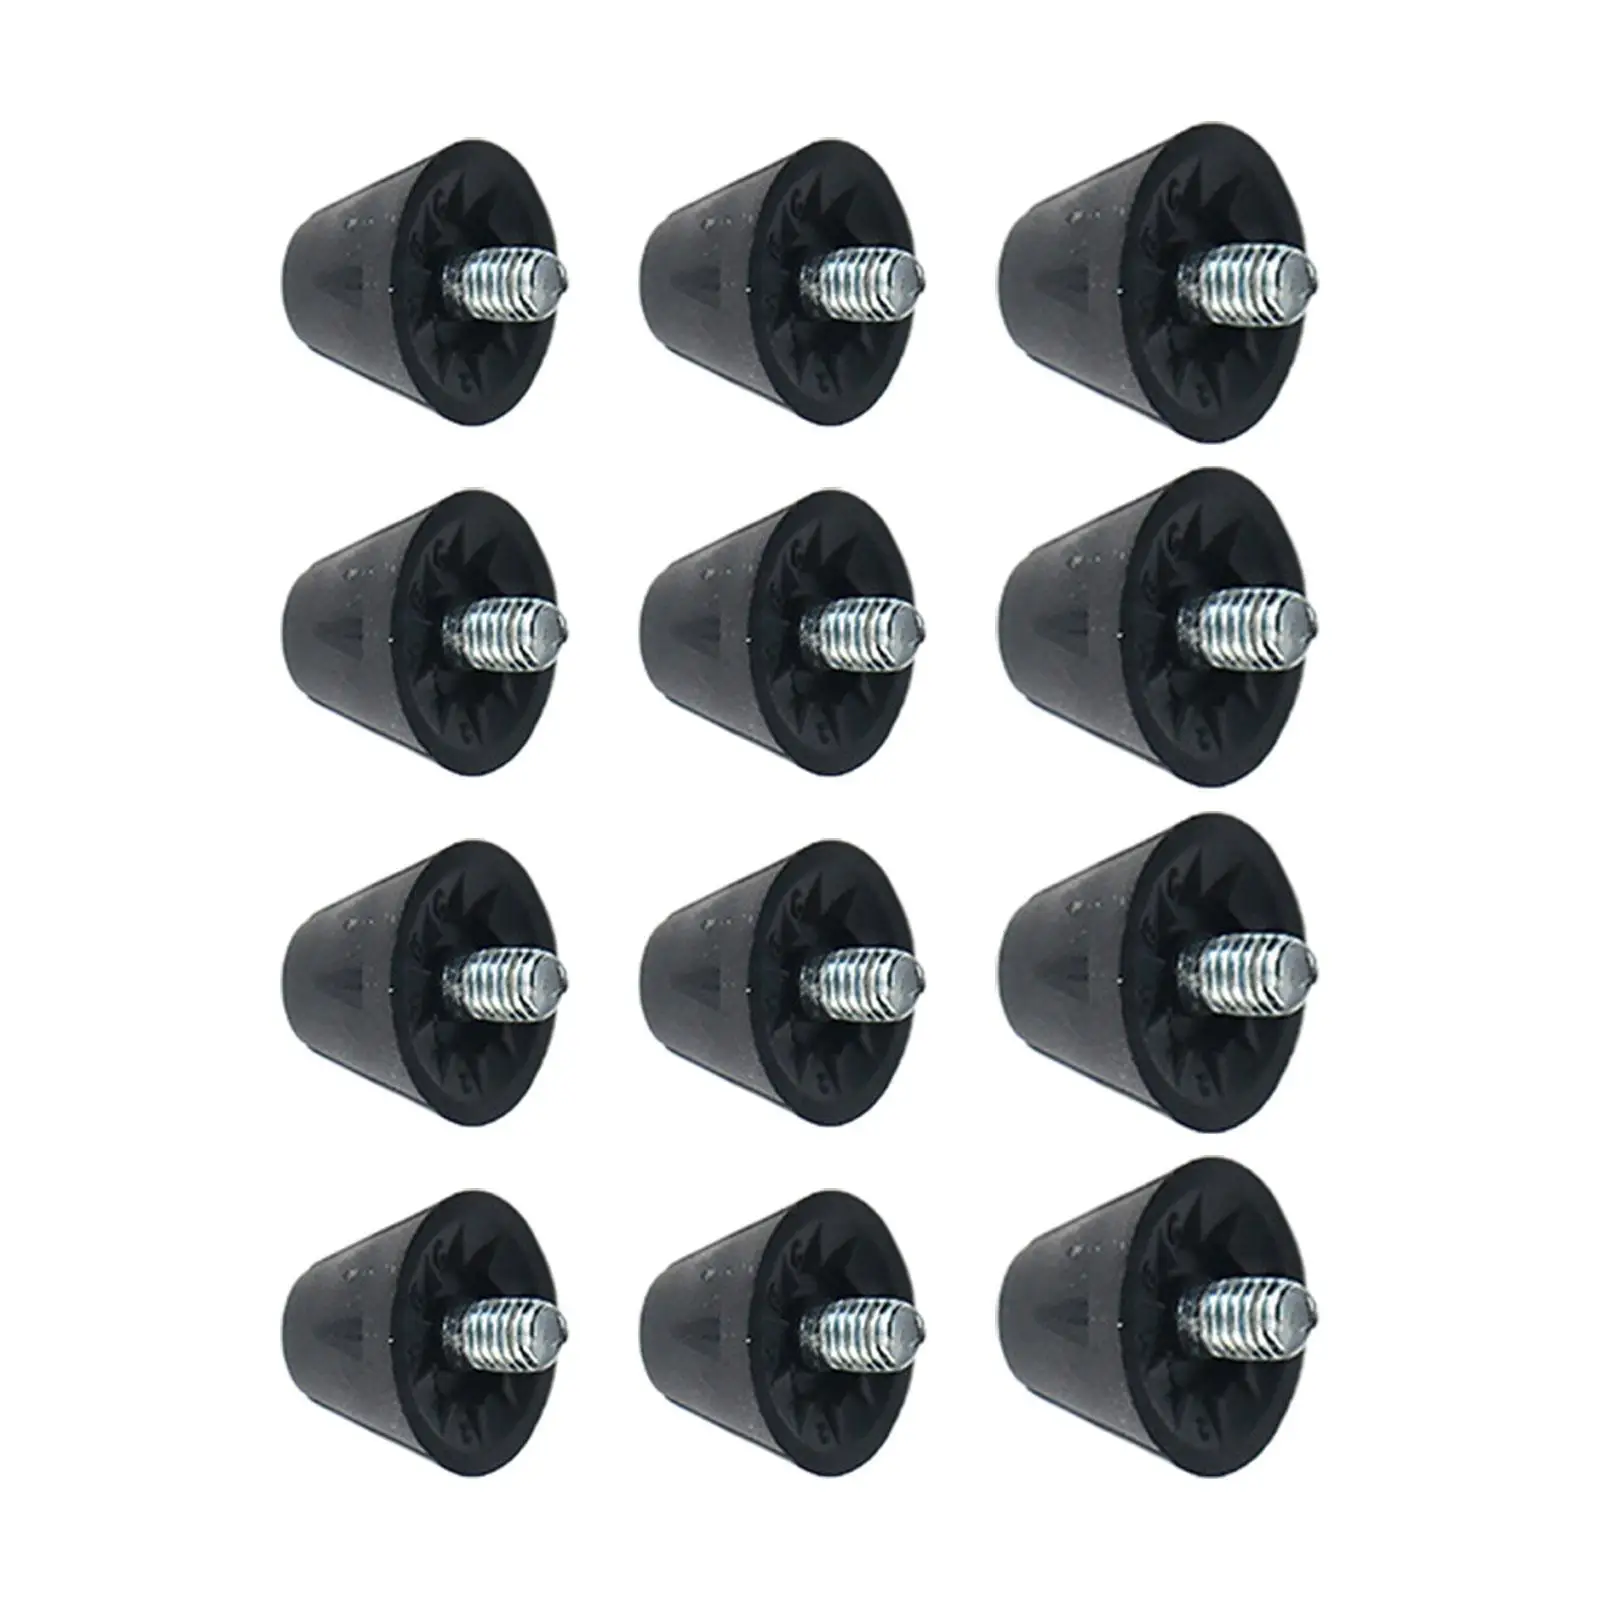 12Pcs Football Shoe Spikes Non Slip Stable Turf M5 Threaded Rugby Studs for Competition Athletic Sneakers Indoor Outdoor Sports